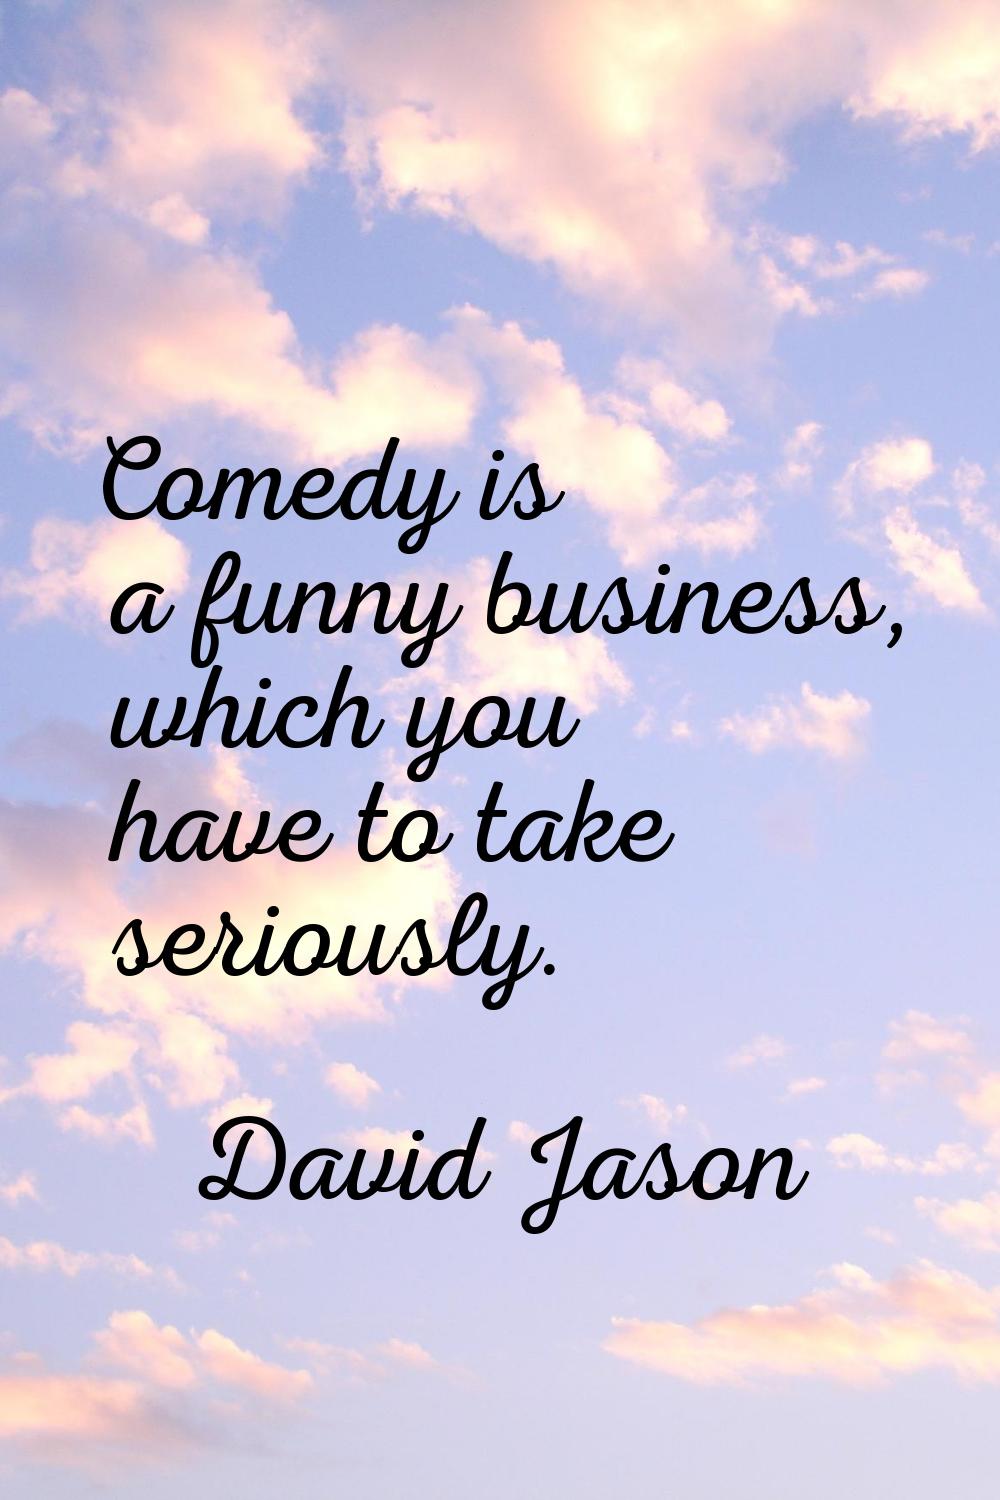 Comedy is a funny business, which you have to take seriously.